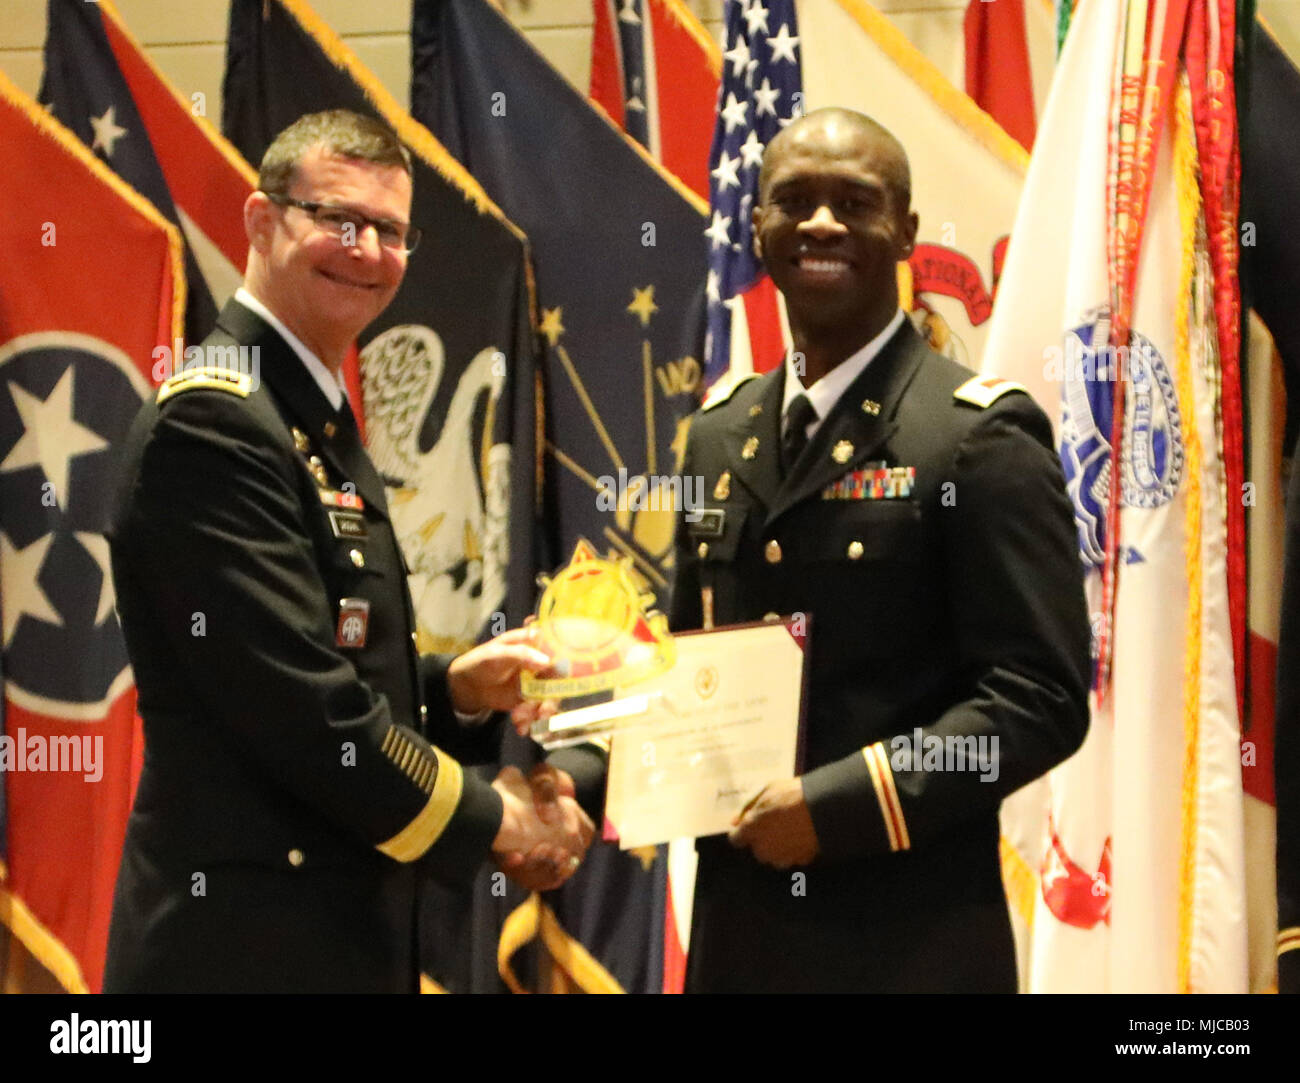 Brig. Gen. Jeffrey W. Drushal (left), chief of transportation and commandant, U.S. Army Transportation School, presented the best 2017 Transportation Reserve Warrant Officer Award to Chief Warrant Officer 2 Cleophus S. Wallace, 840th Transportation Battalion, Camp Arifjan, Kuwait, during the U.S. Army Transportation Corps annual regimental honors ceremony May 1 at Wylie Hall on Fort Lee, Virginia. The ceremony was held as part of the U.S. Army Combined Arms Support Command Sustainment Week branch day activities. Stock Photo